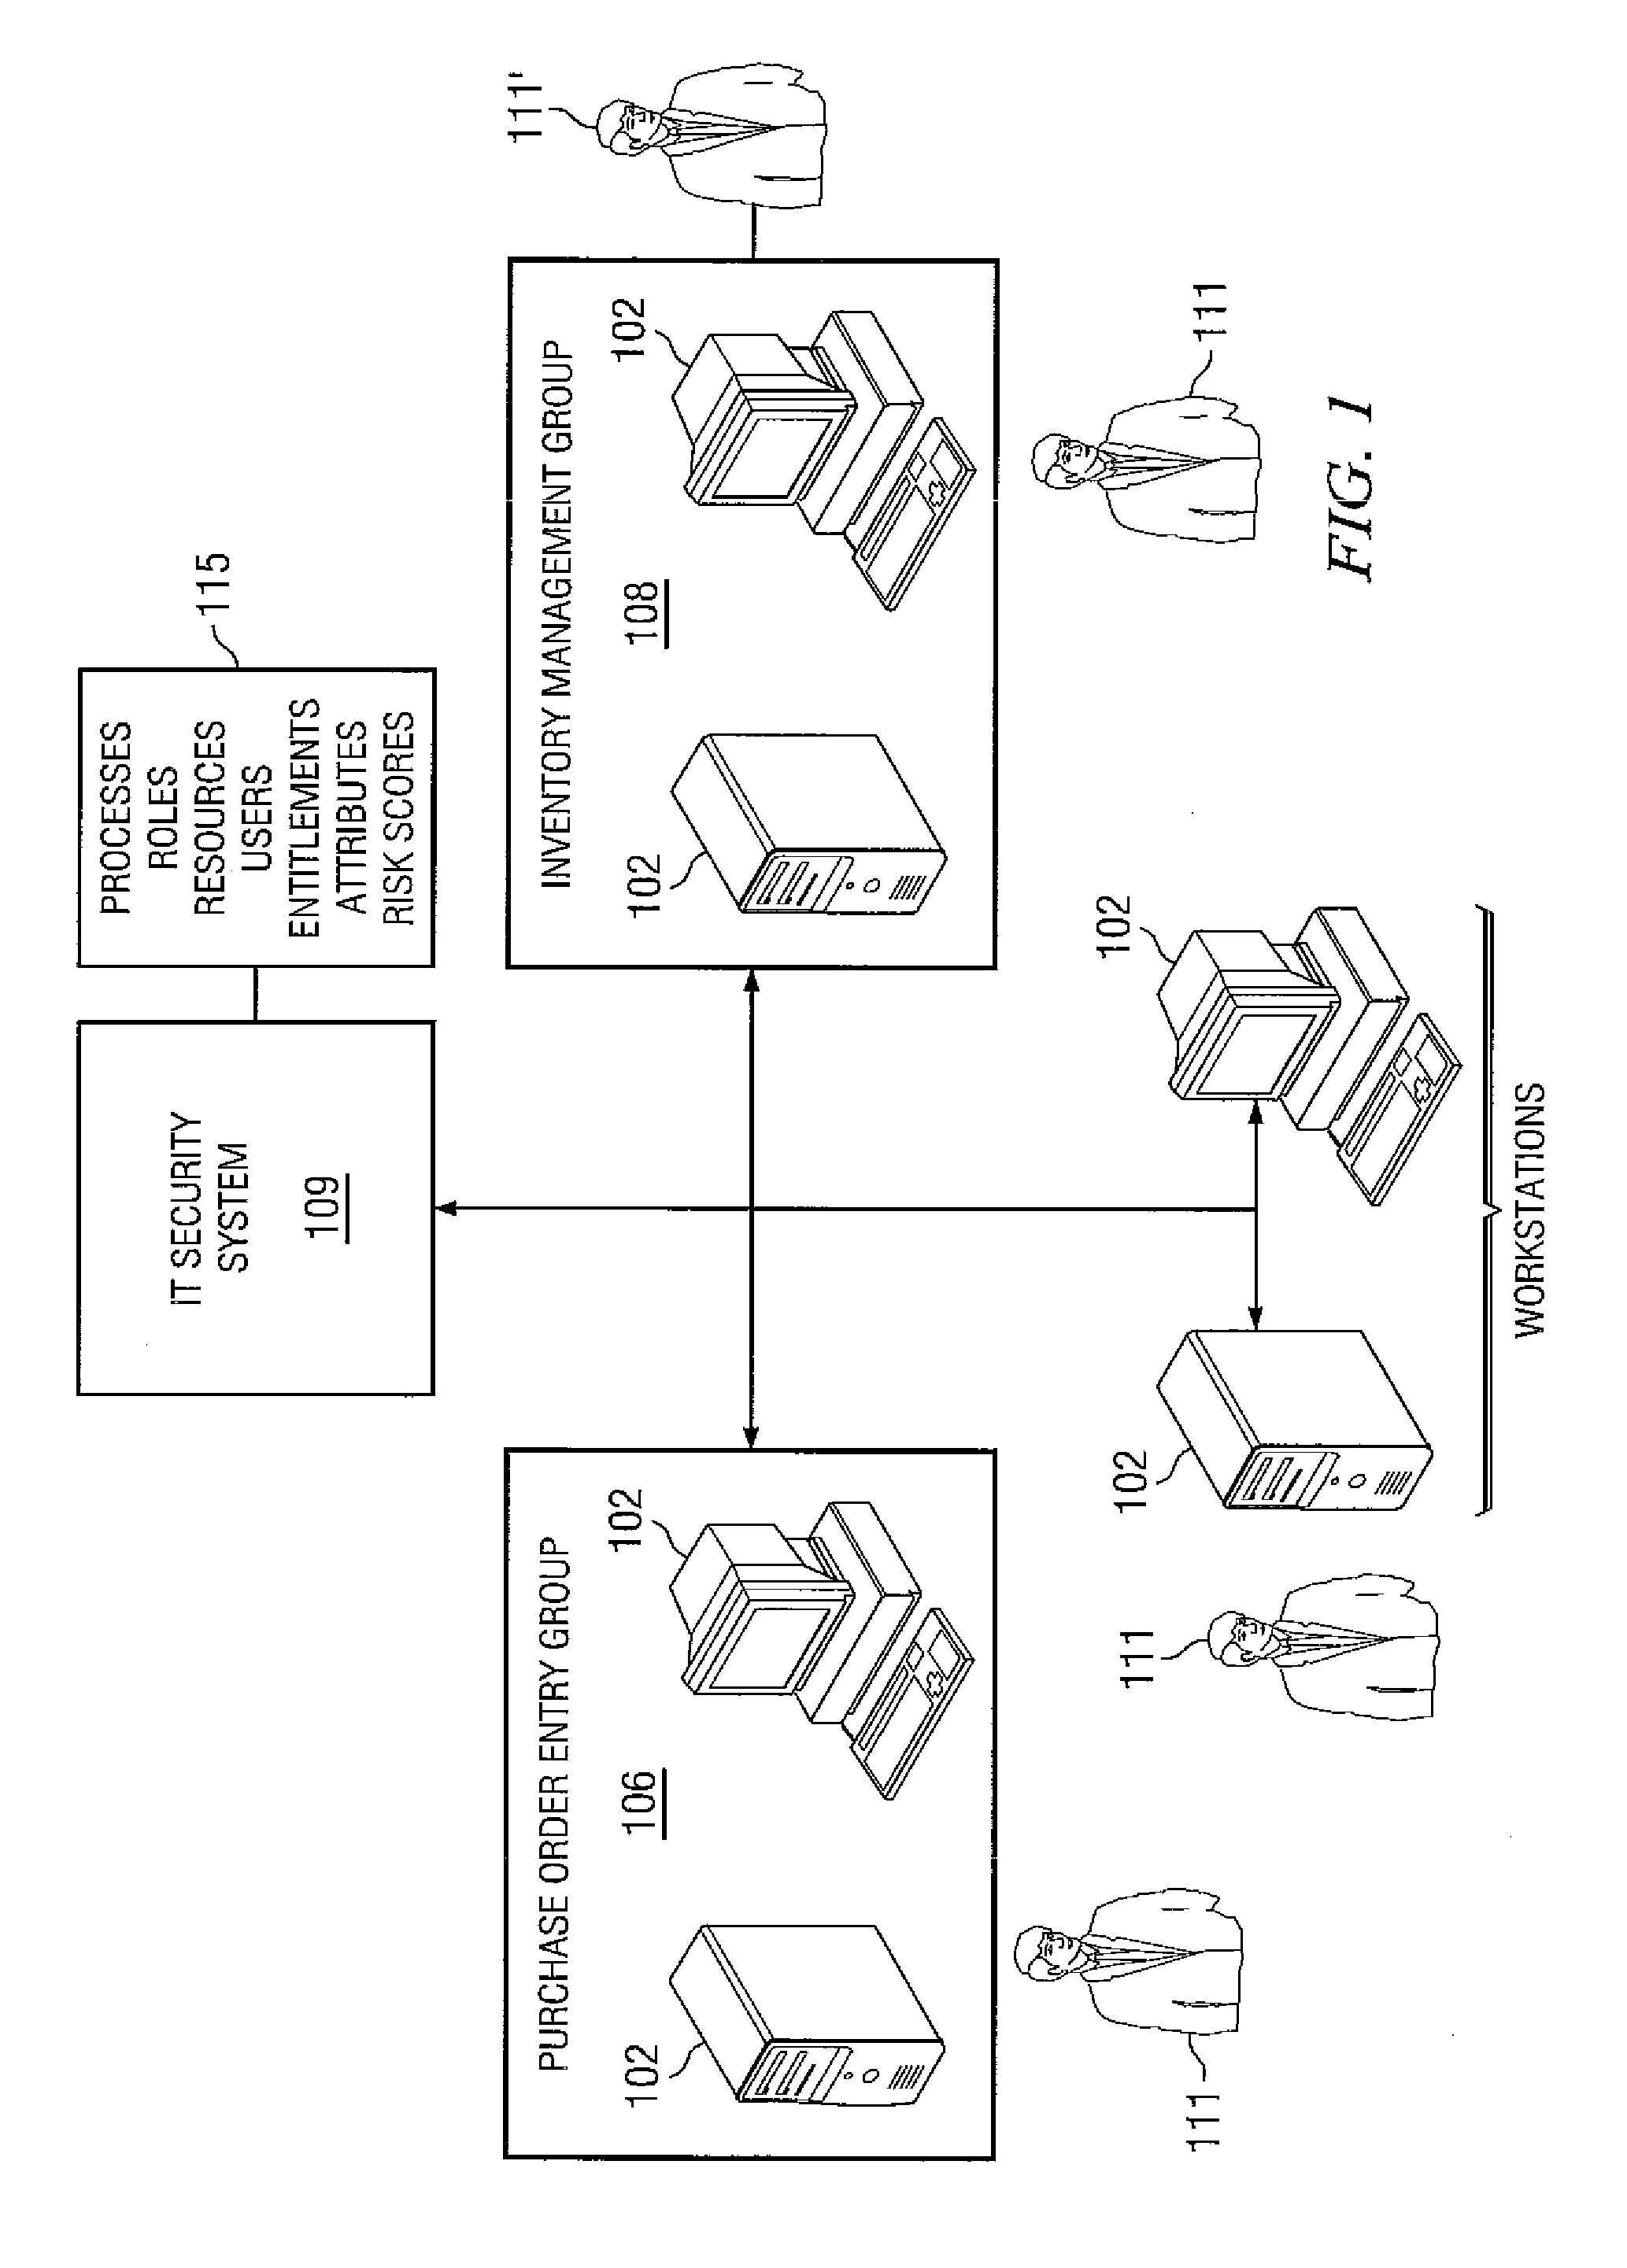 System and method for user access risk scoring